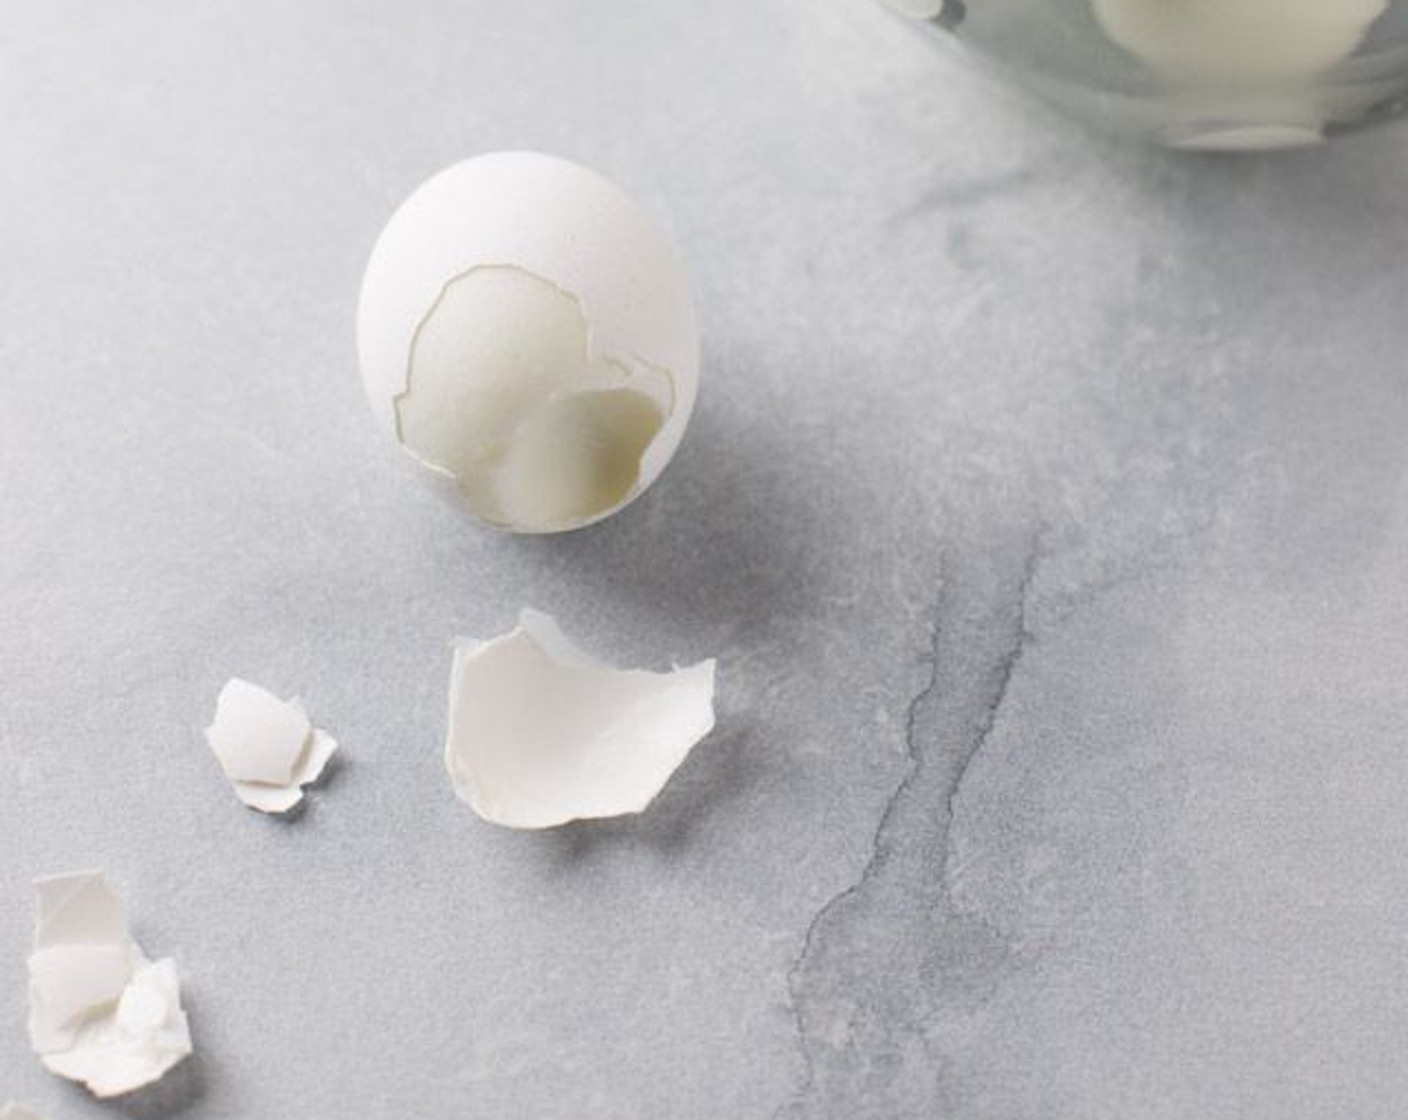 step 1 Peel your hard boiled Eggs (10) and rinse off any excess shell pieces.